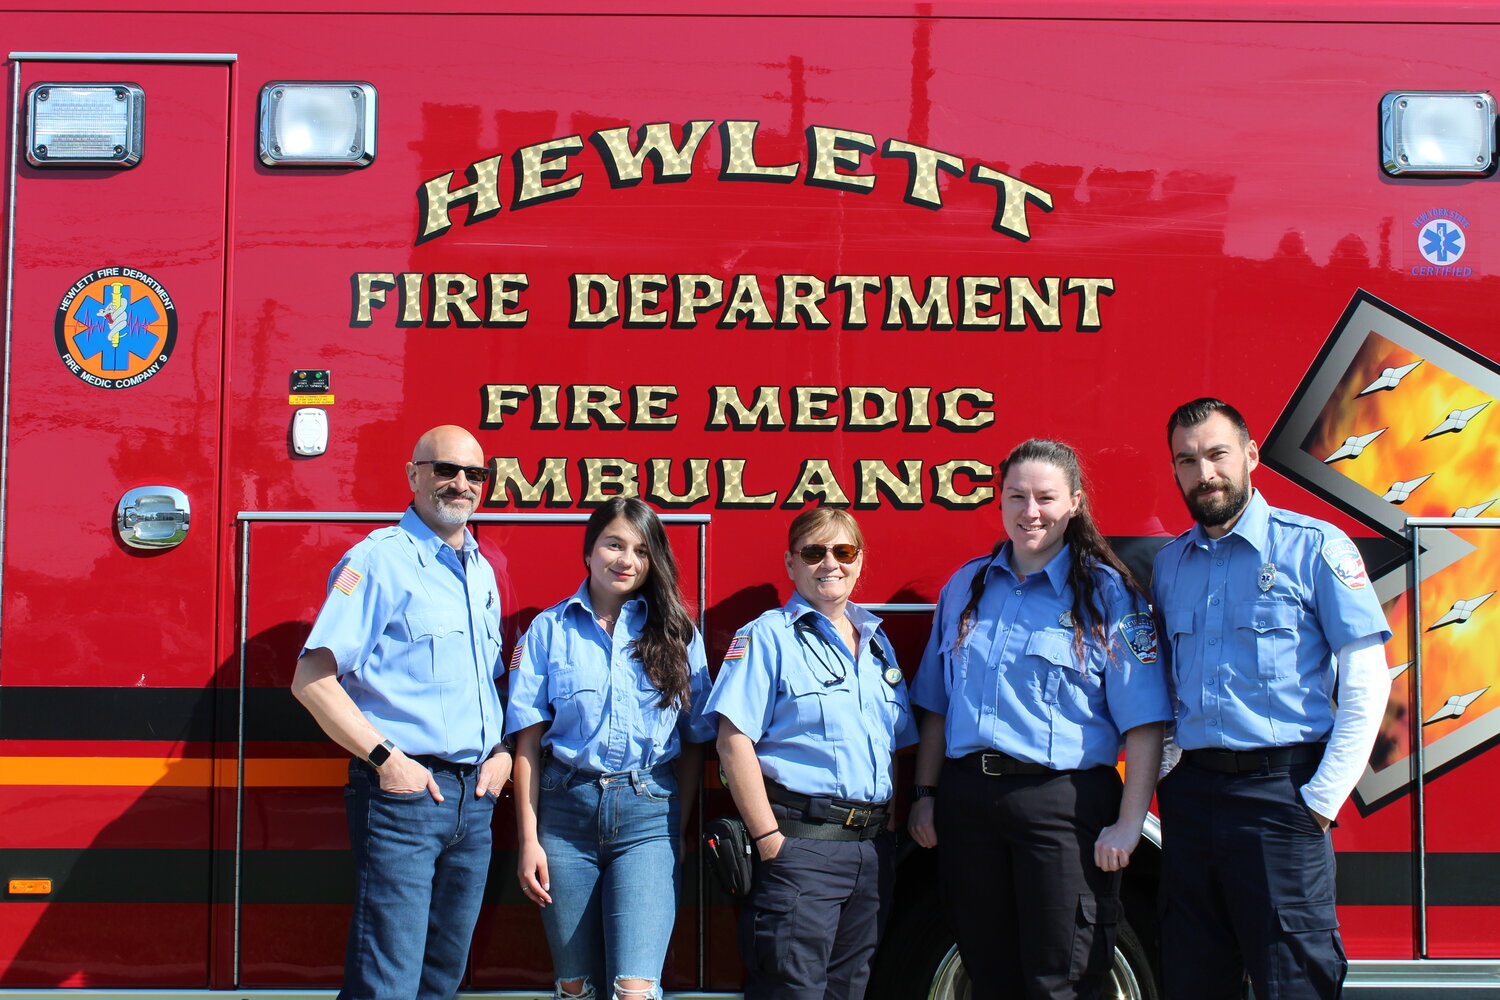 The volunteer Hewlett Fire Department has covered parts of Hewlett, North Woodmere, and its surrounding areas since 1891. Posed in front of its ambulance truck from left are Martin Kohn, secretary Daniela Barskaya, Capt. Karen Fiorello, Samantha Beauchamp and Lt. Gary Kotlyar.